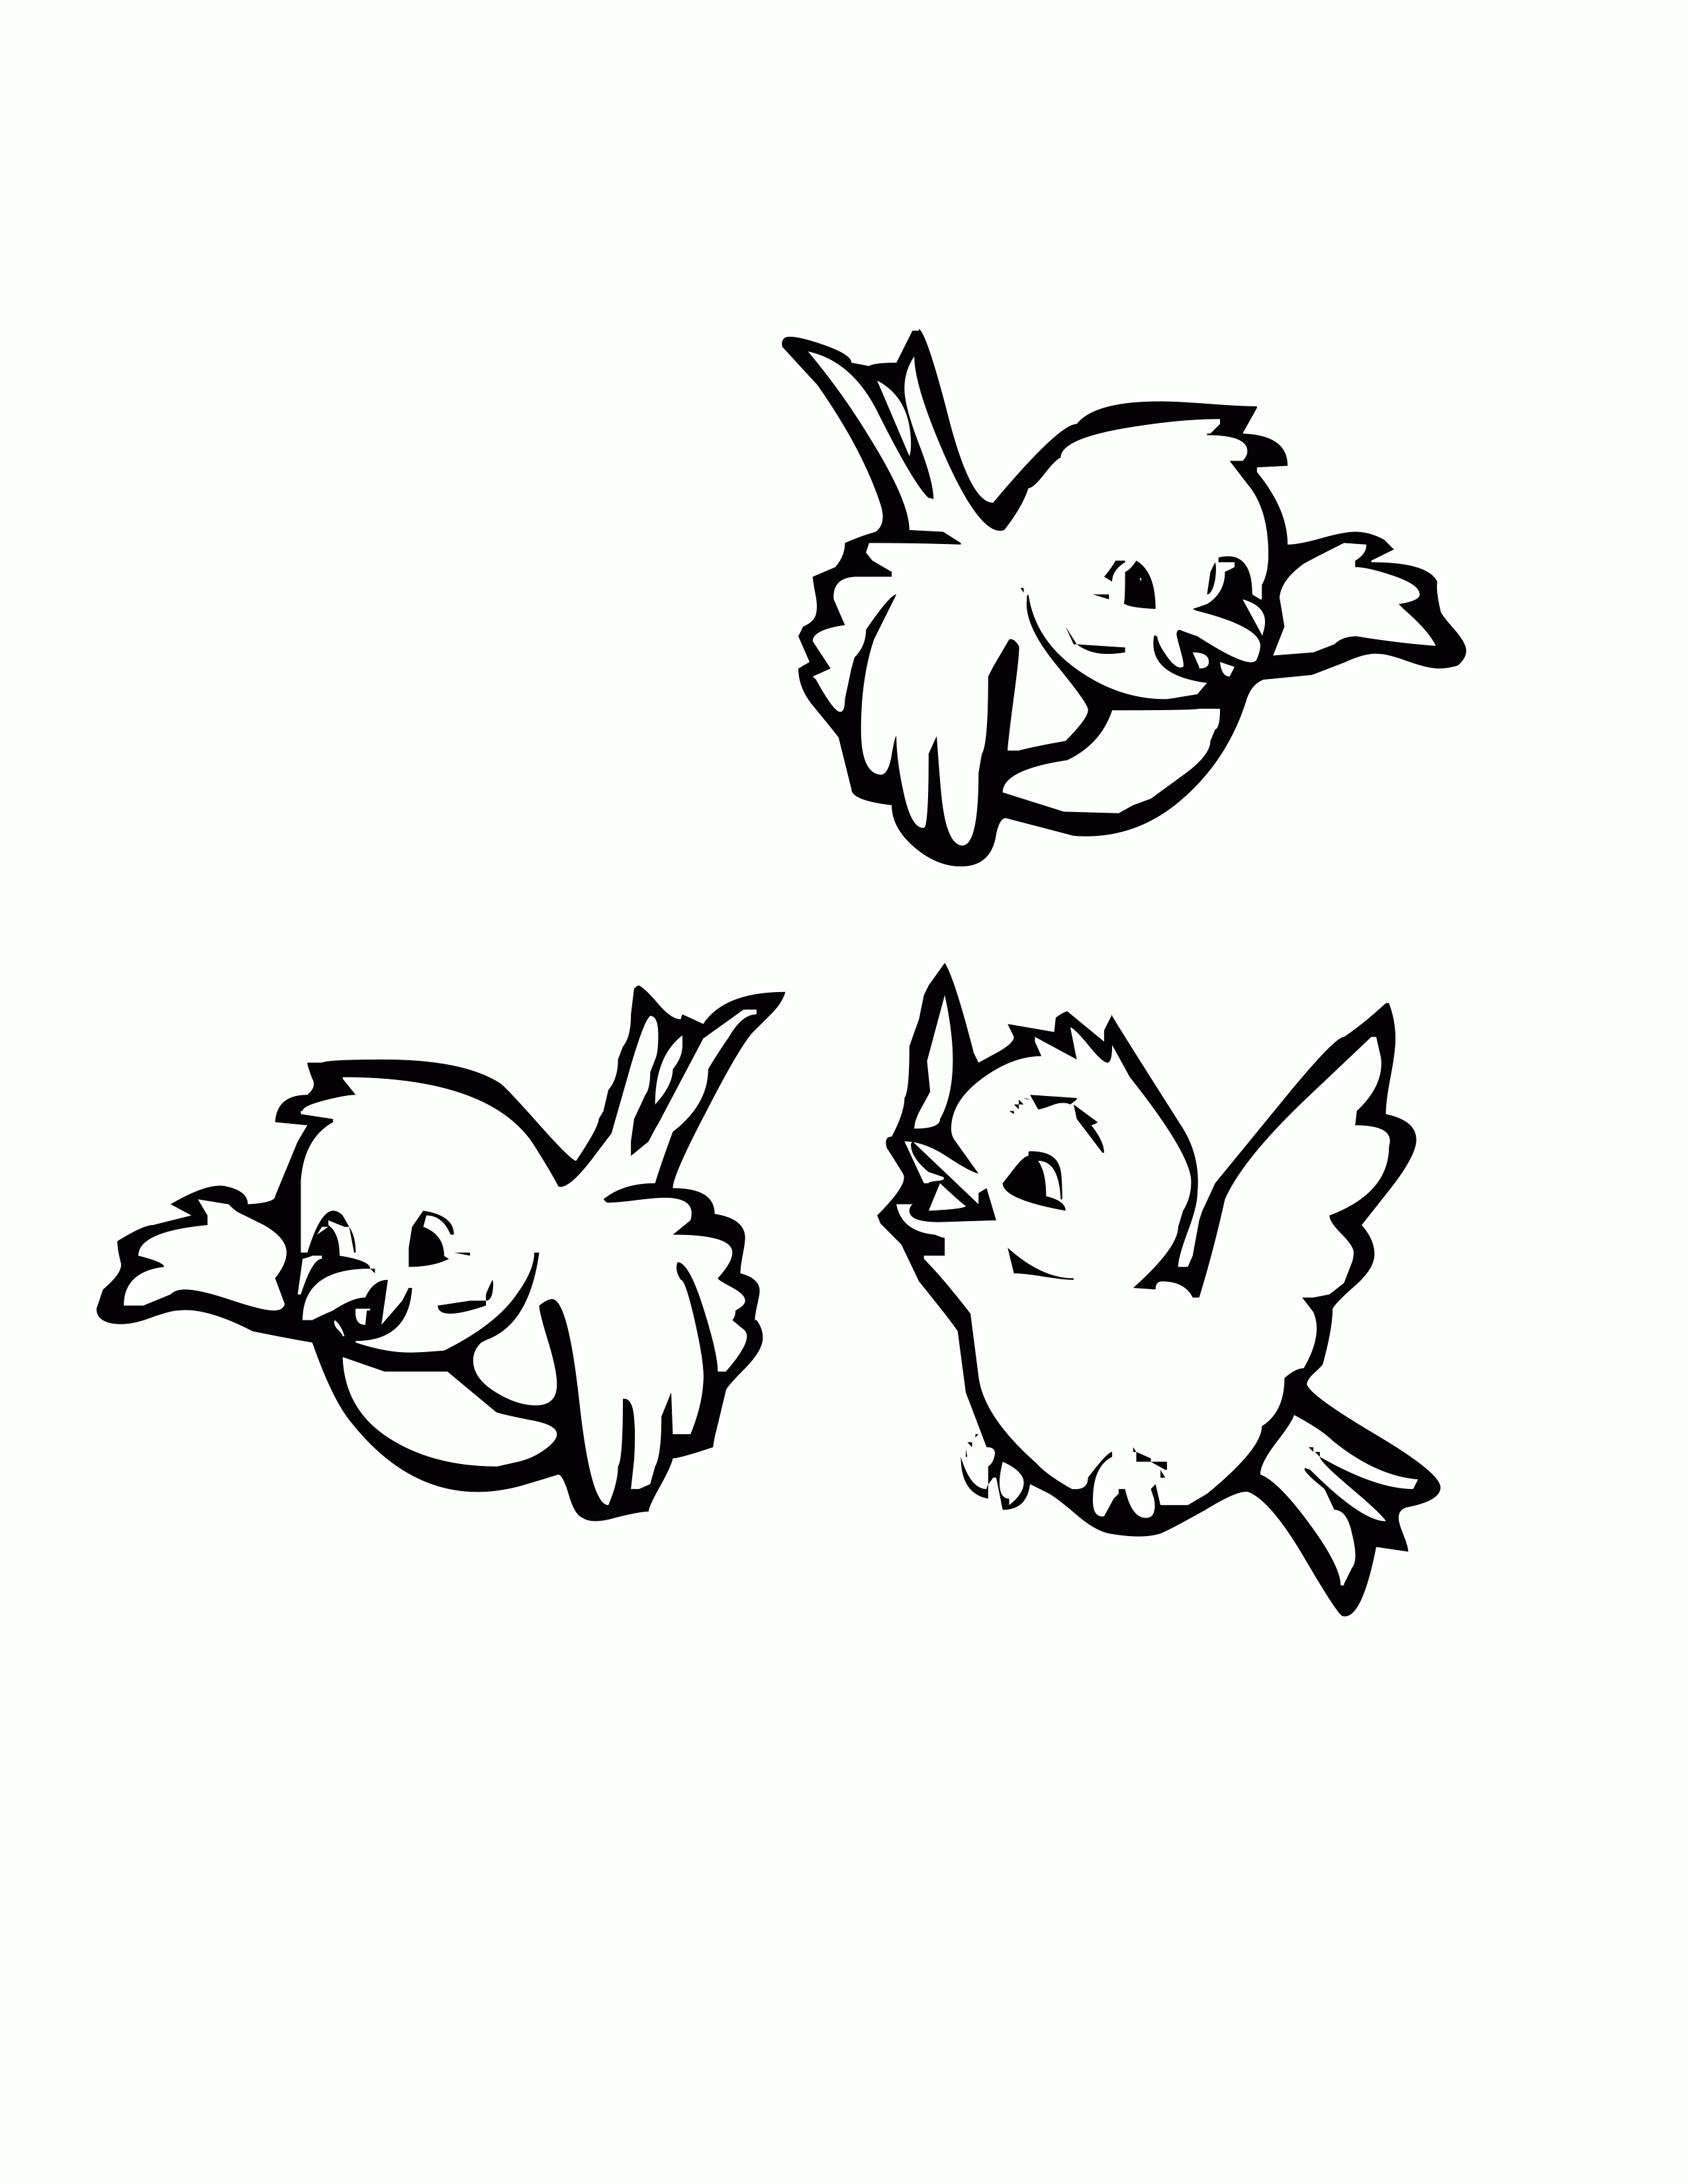 Coloring Pages Birds To Print - Coloring Pages For All Ages